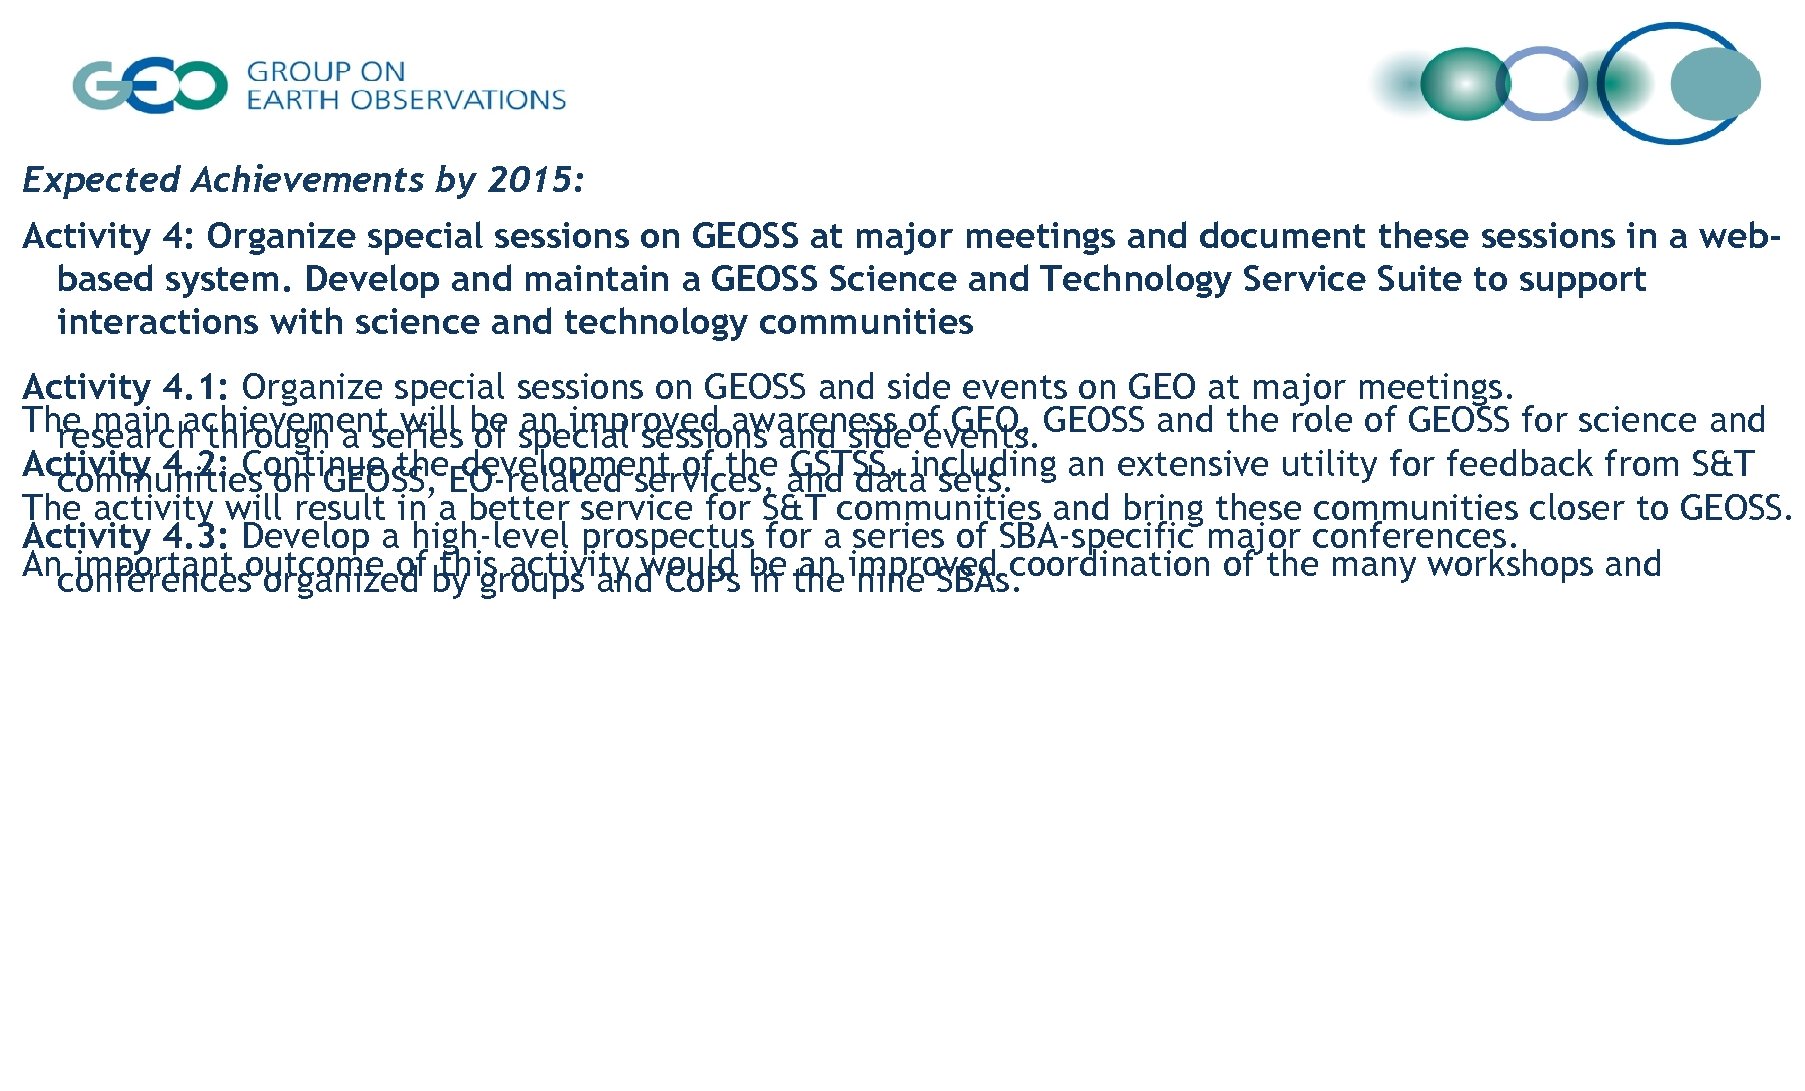 Expected Achievements by 2015: Activity 4: Organize special sessions on GEOSS at major meetings